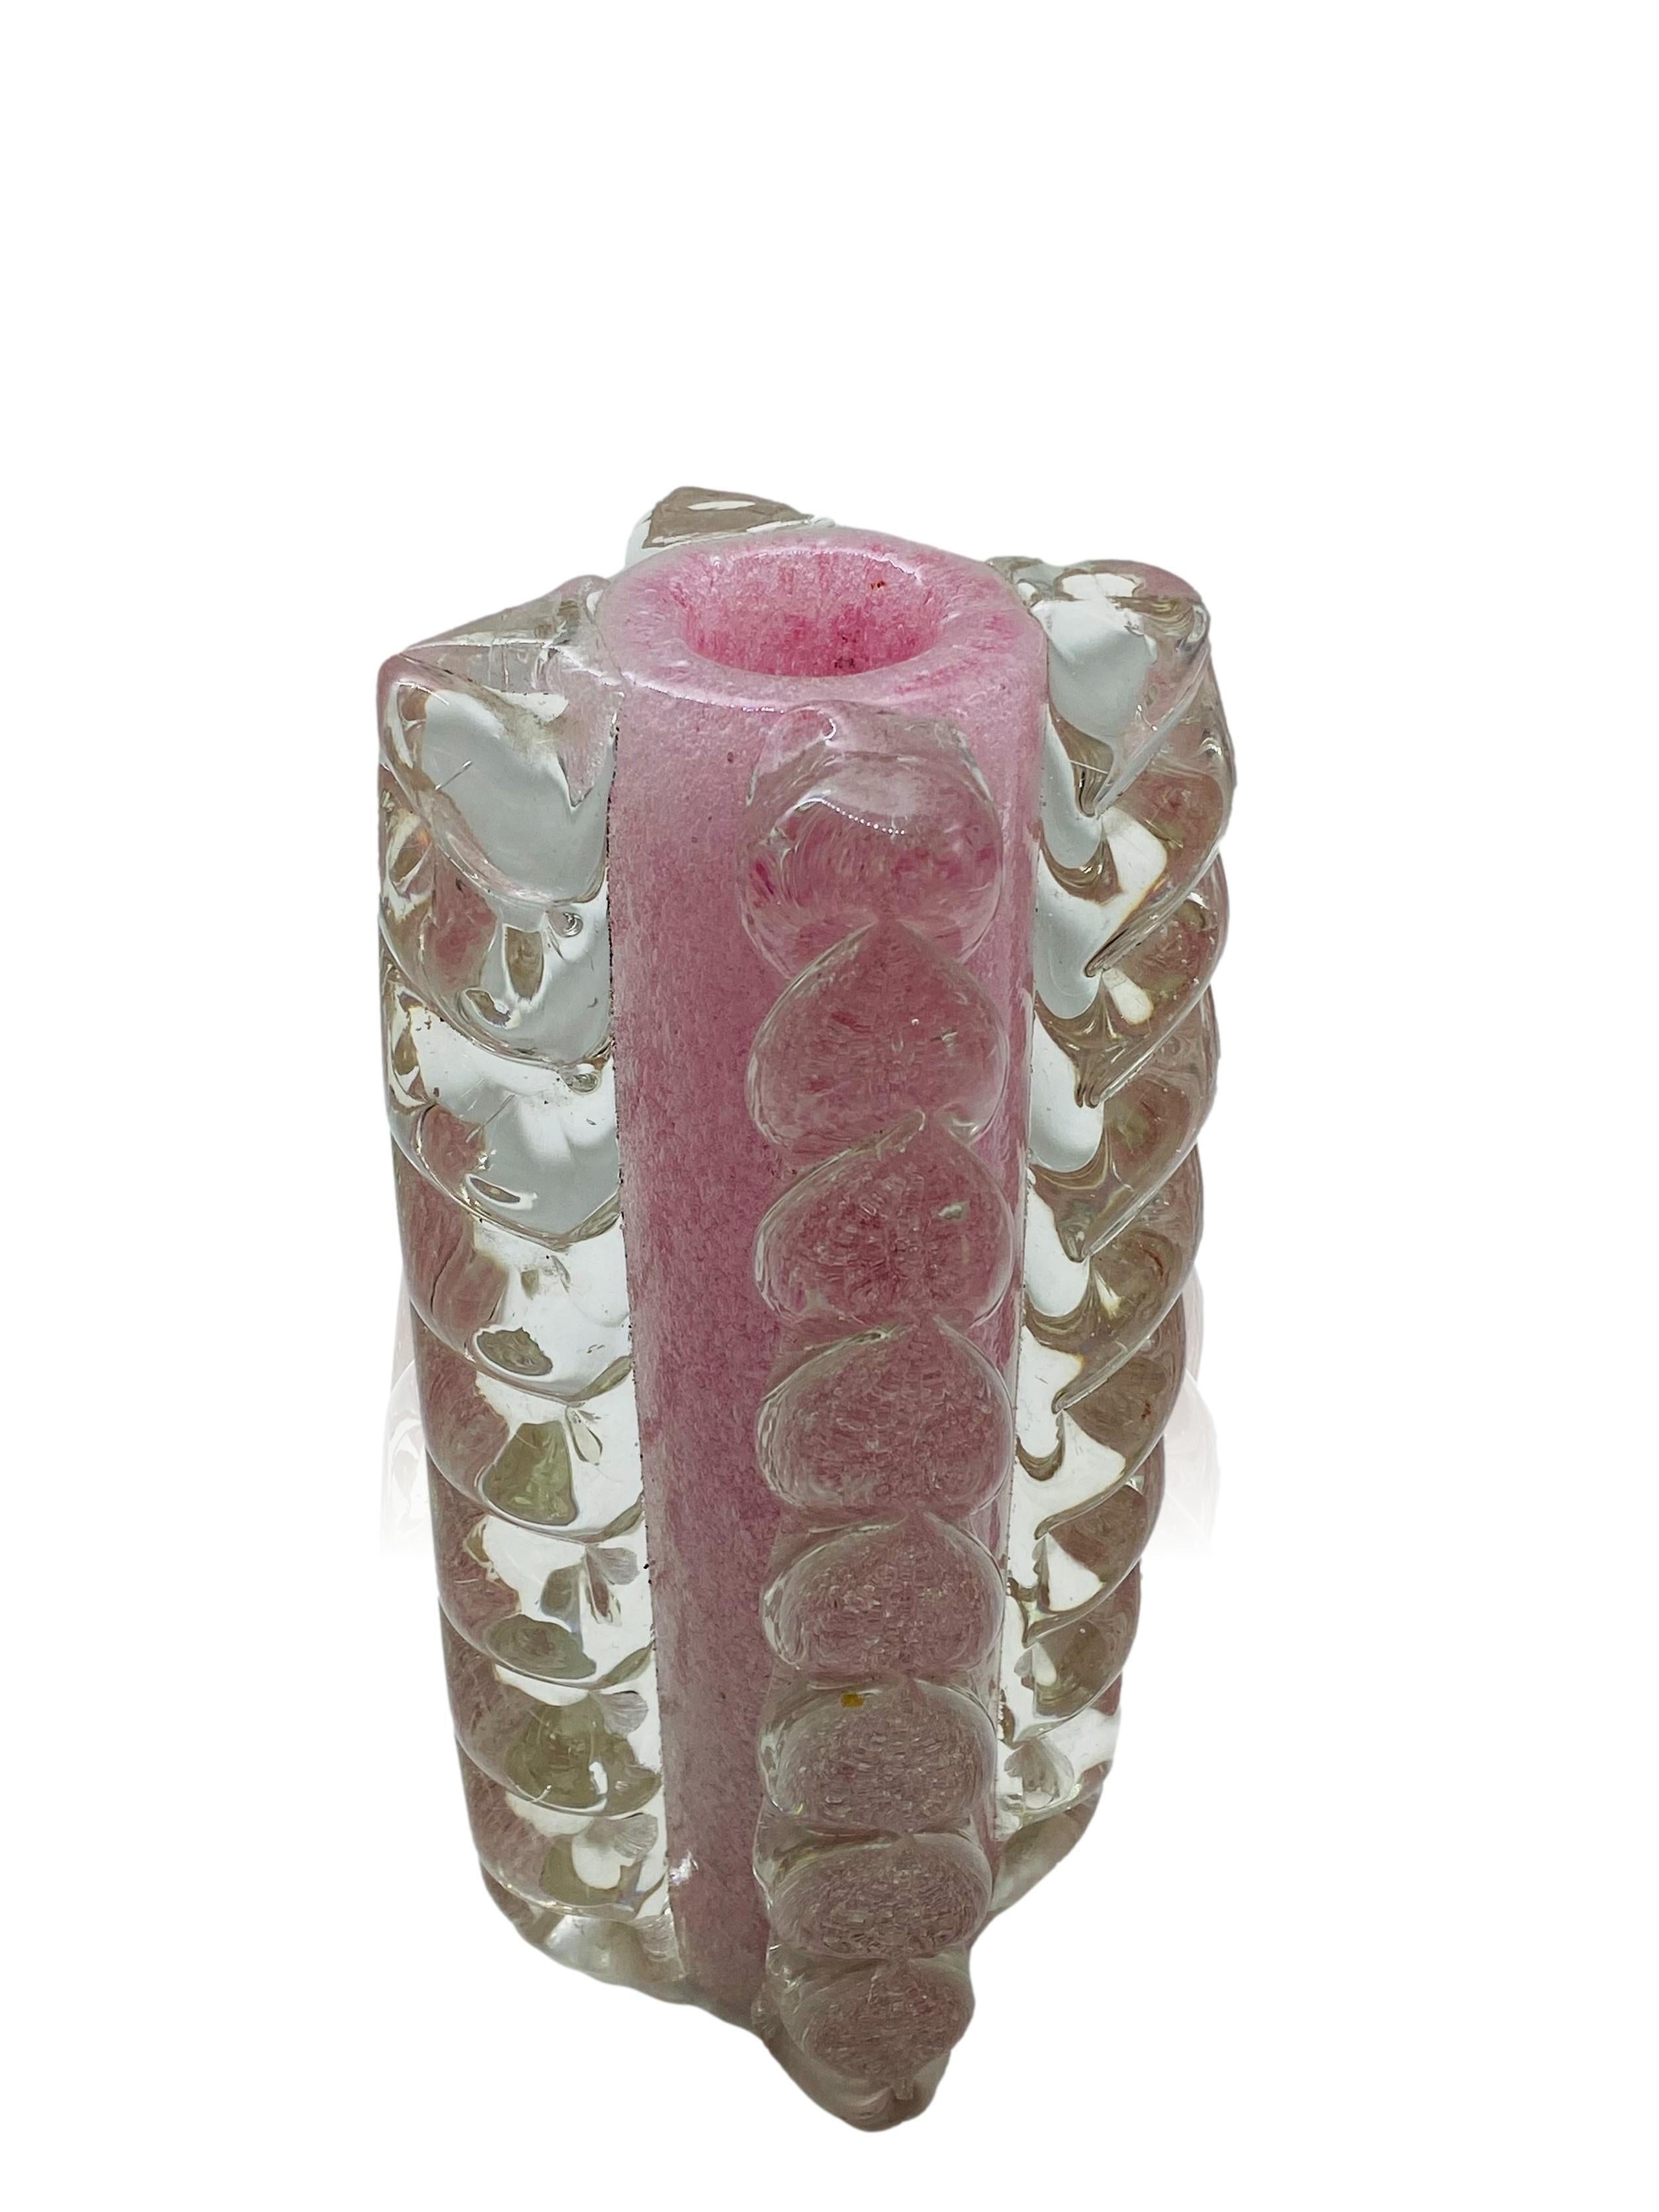 Mid-Century Modern Spuma di Mare Vase by Ercole Barovier for Barovier & Toso, Italy, 1938-1940 For Sale